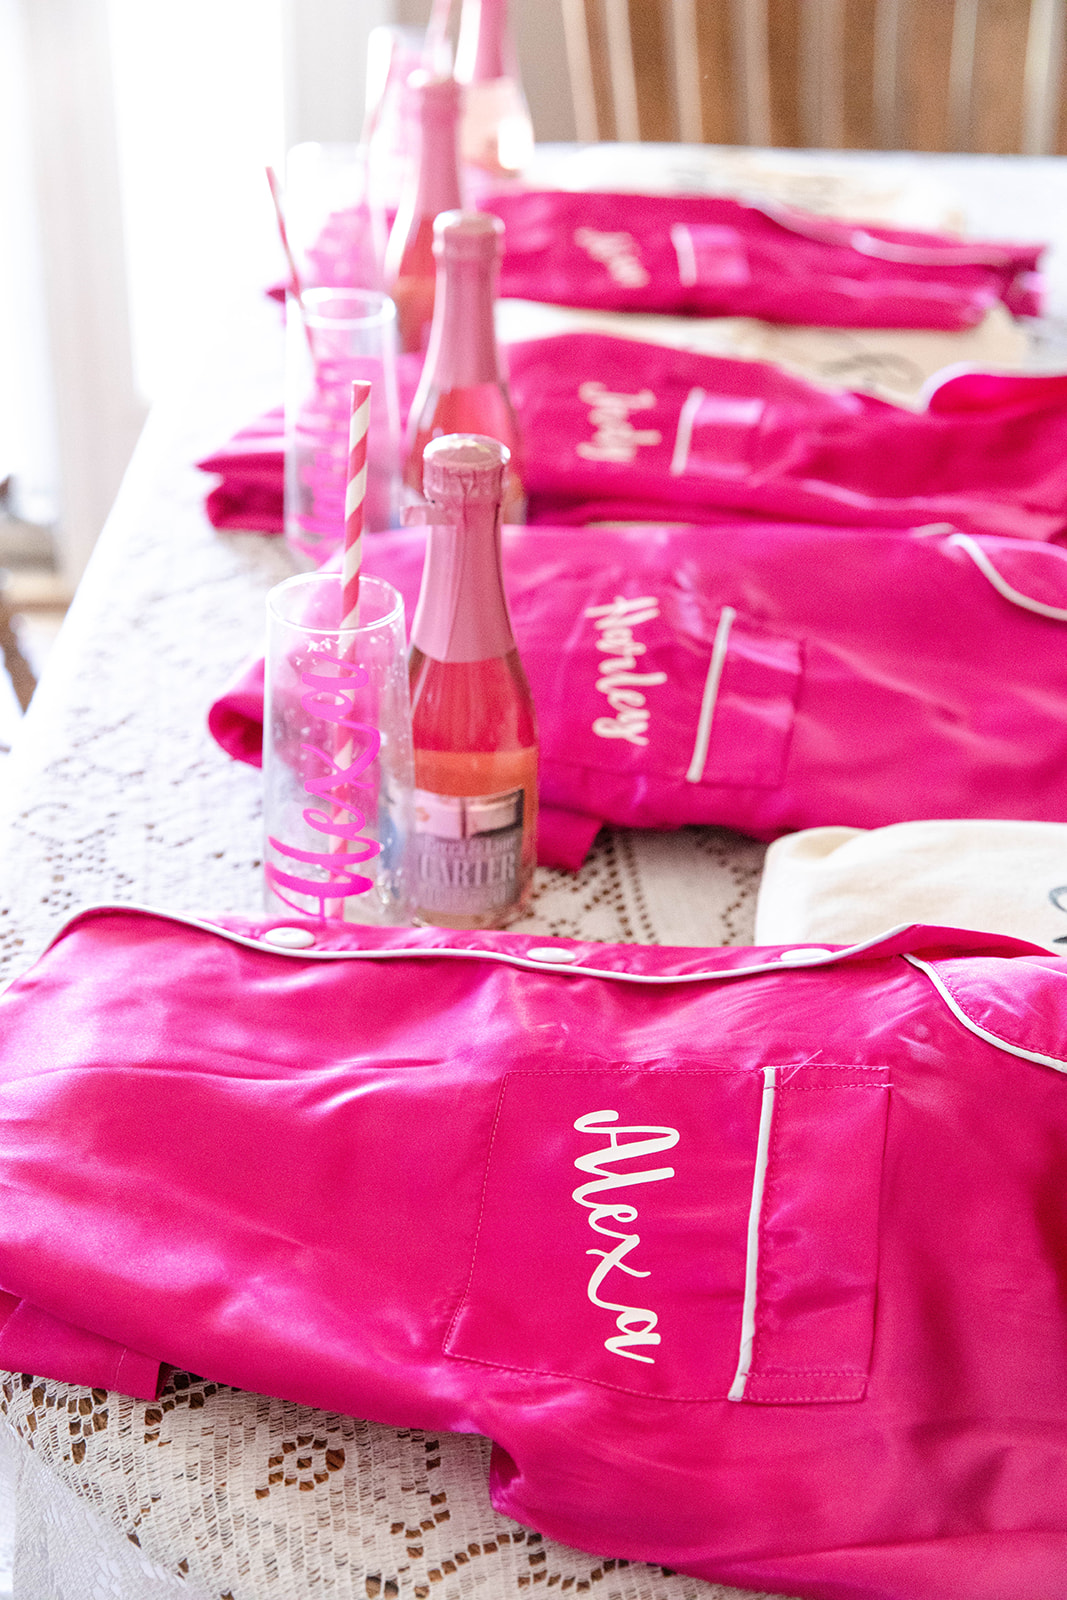 gifts for bridesmaids - custom pajamas and bubbly wine